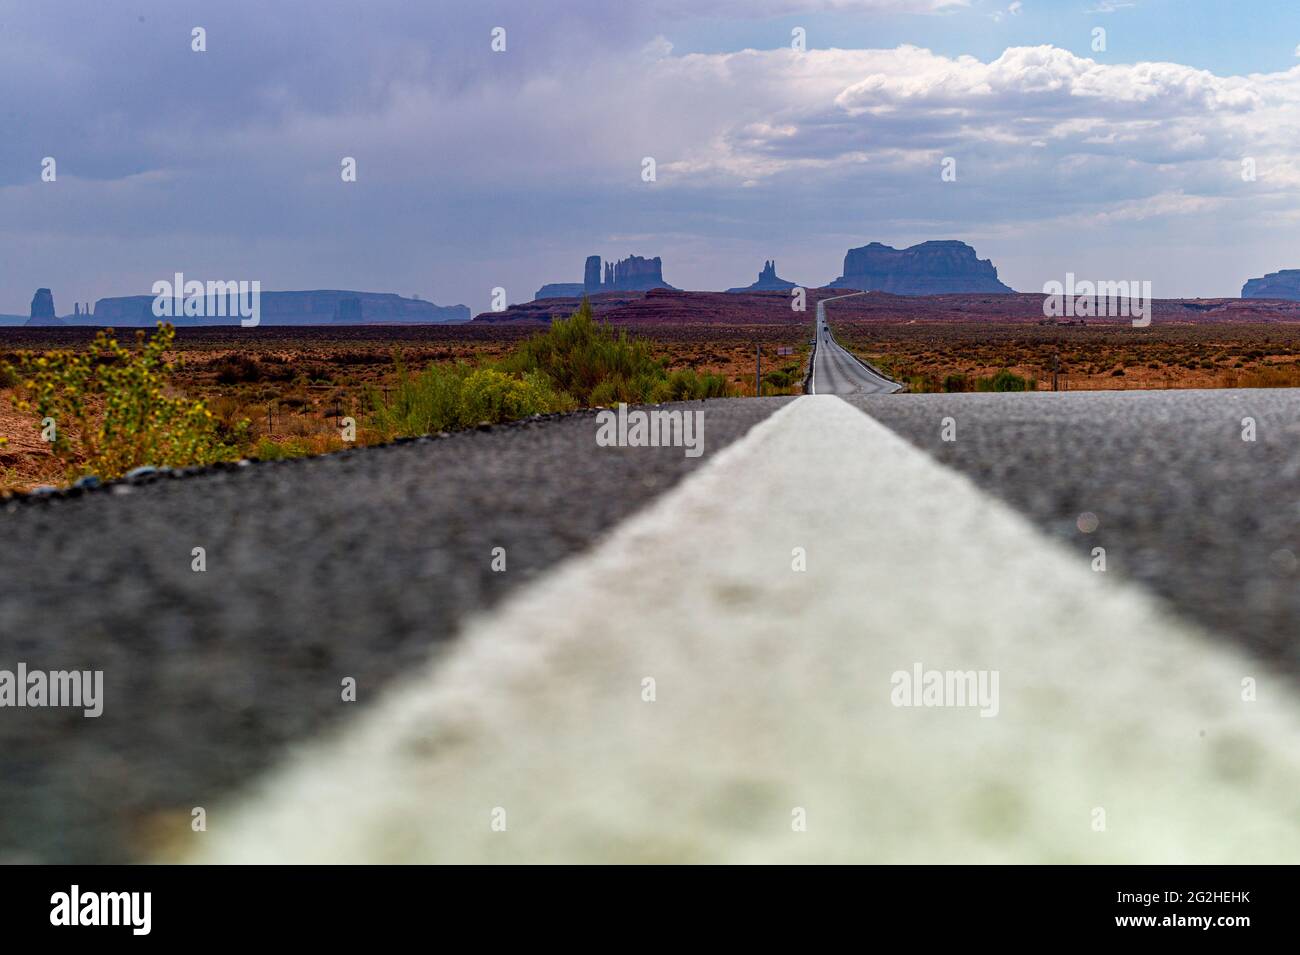 Spectacular view of Monument Valley from famous Forrest Gump Point (Mexican Hat, US-163), Utah, USA. It's the scene in the movie where Forrest finally stops after running everyday for a few years. Stock Photo